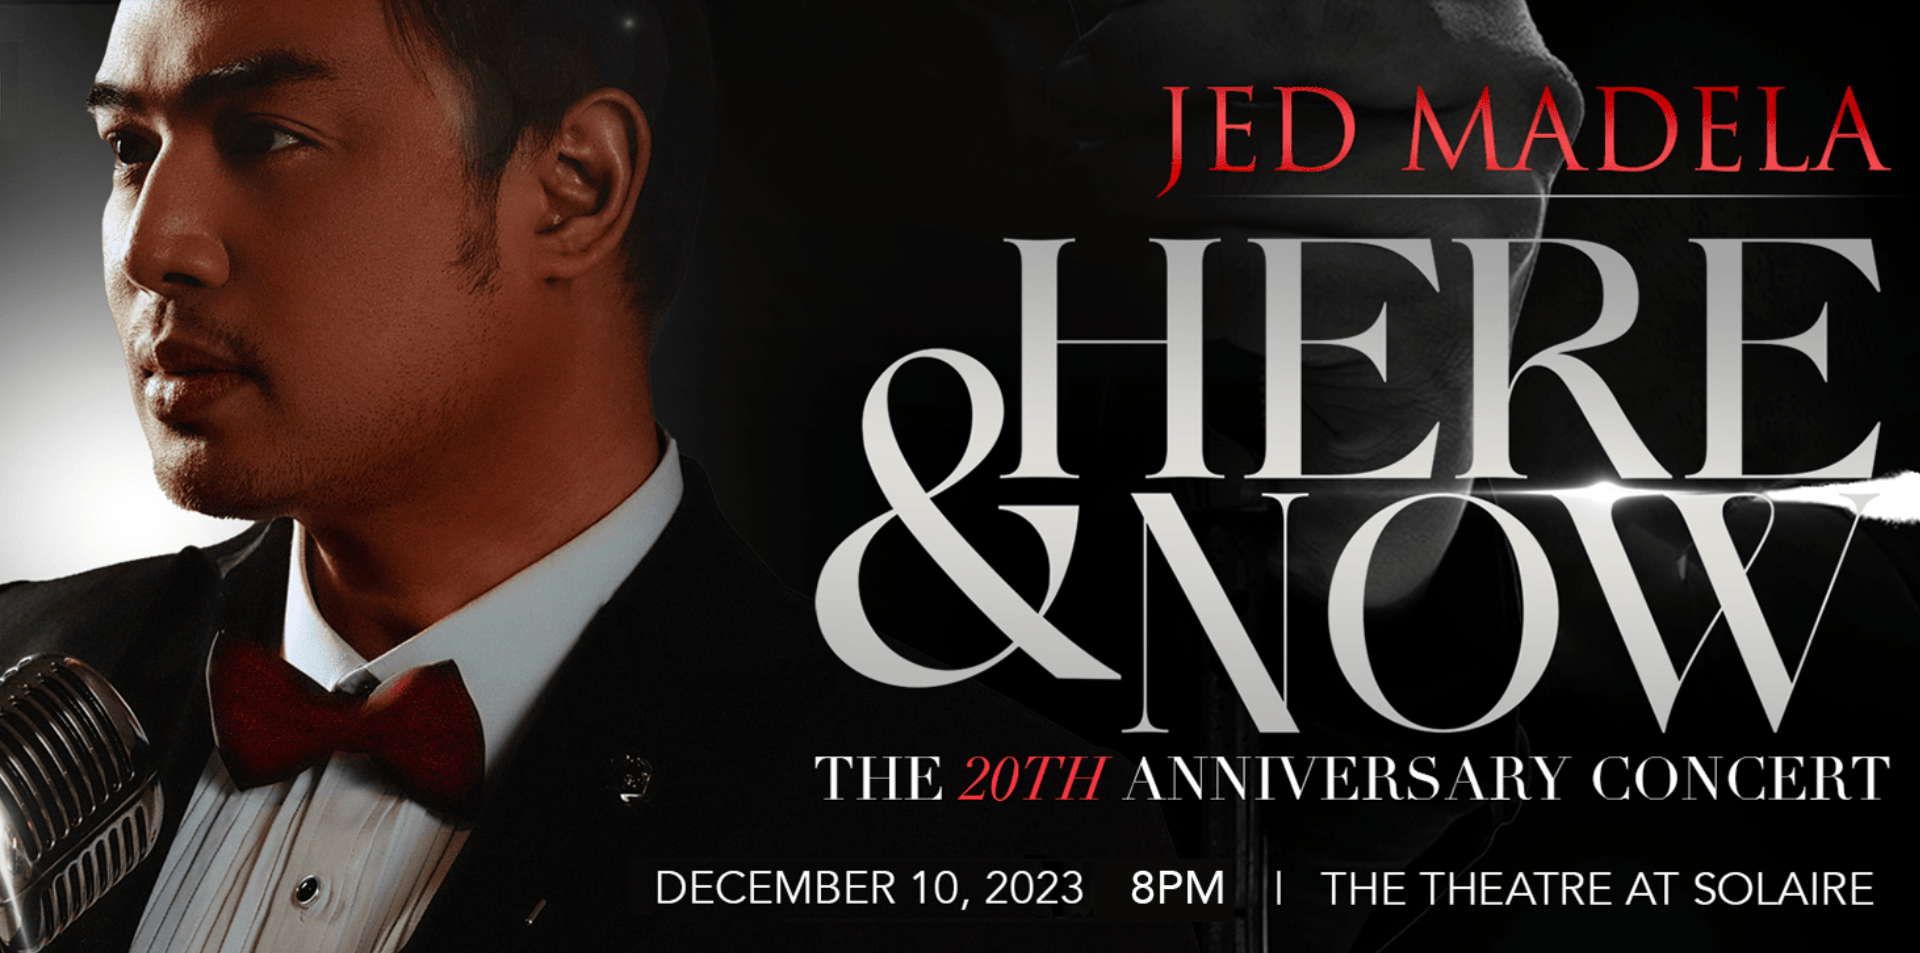 Your Stories, His Music: Jed Madela Celebrates his 20th Anniversary